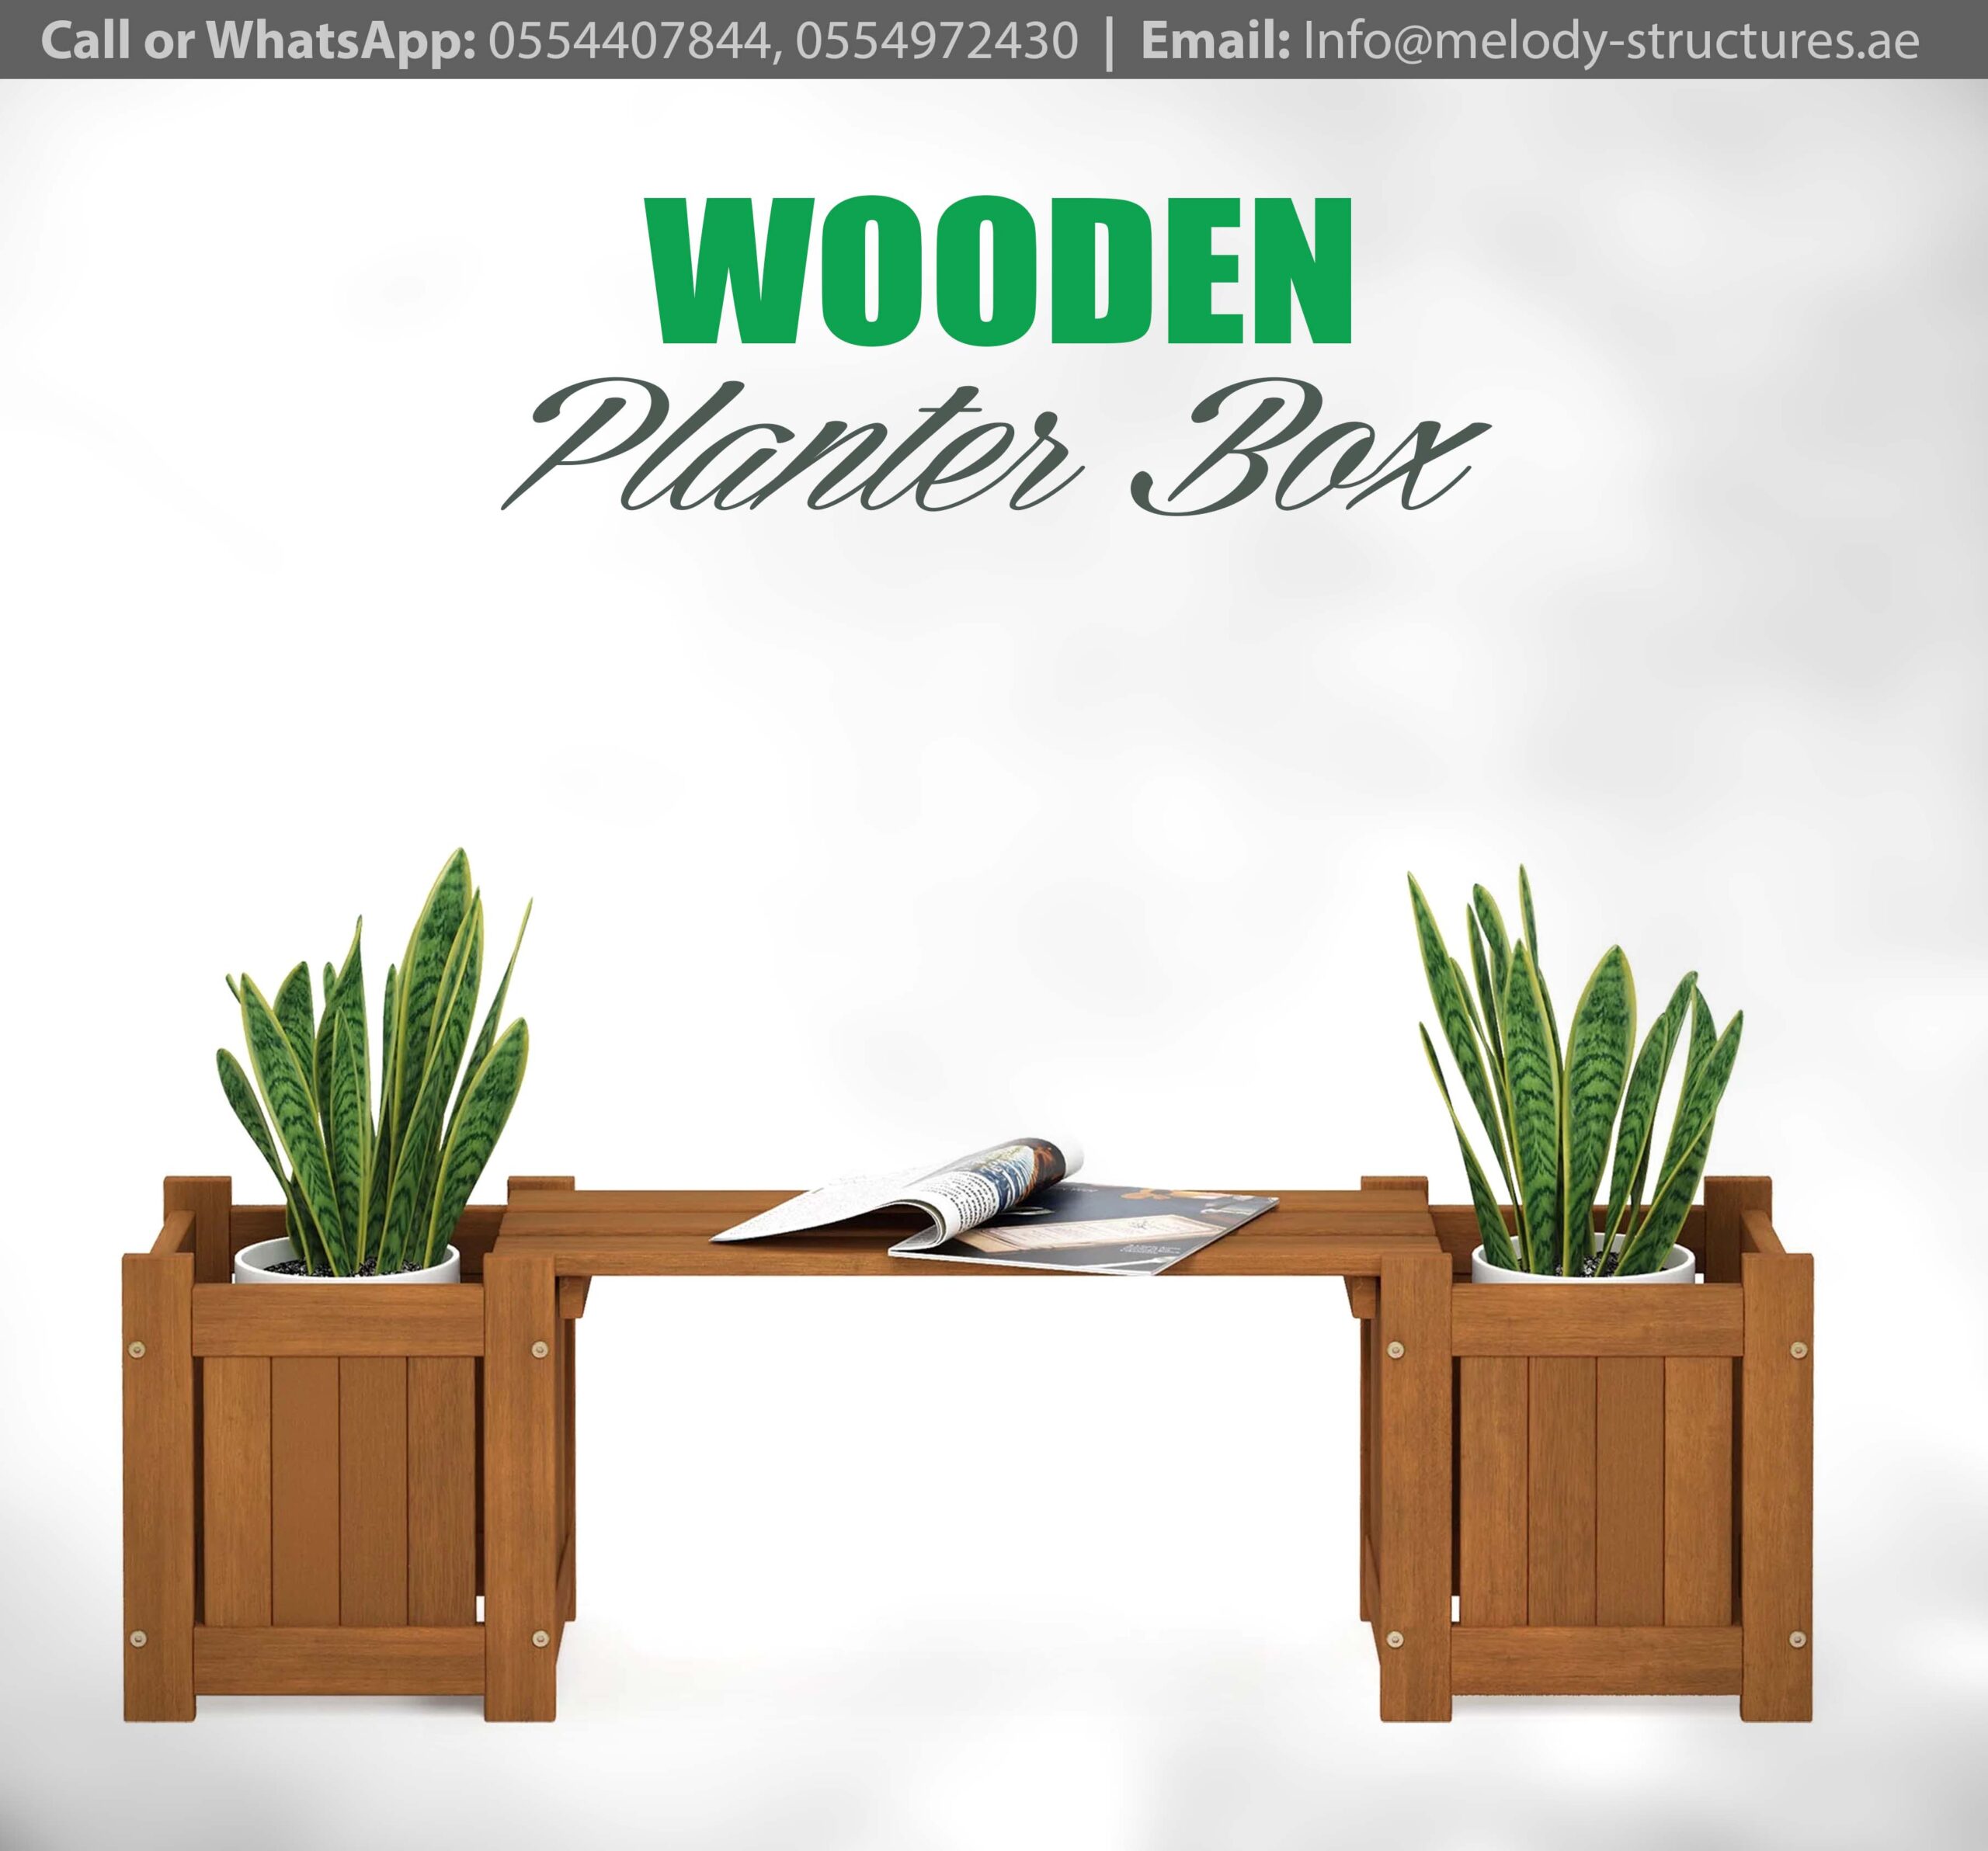 Buy Wooden Planter Box in UAE | Planter Box Suppliers